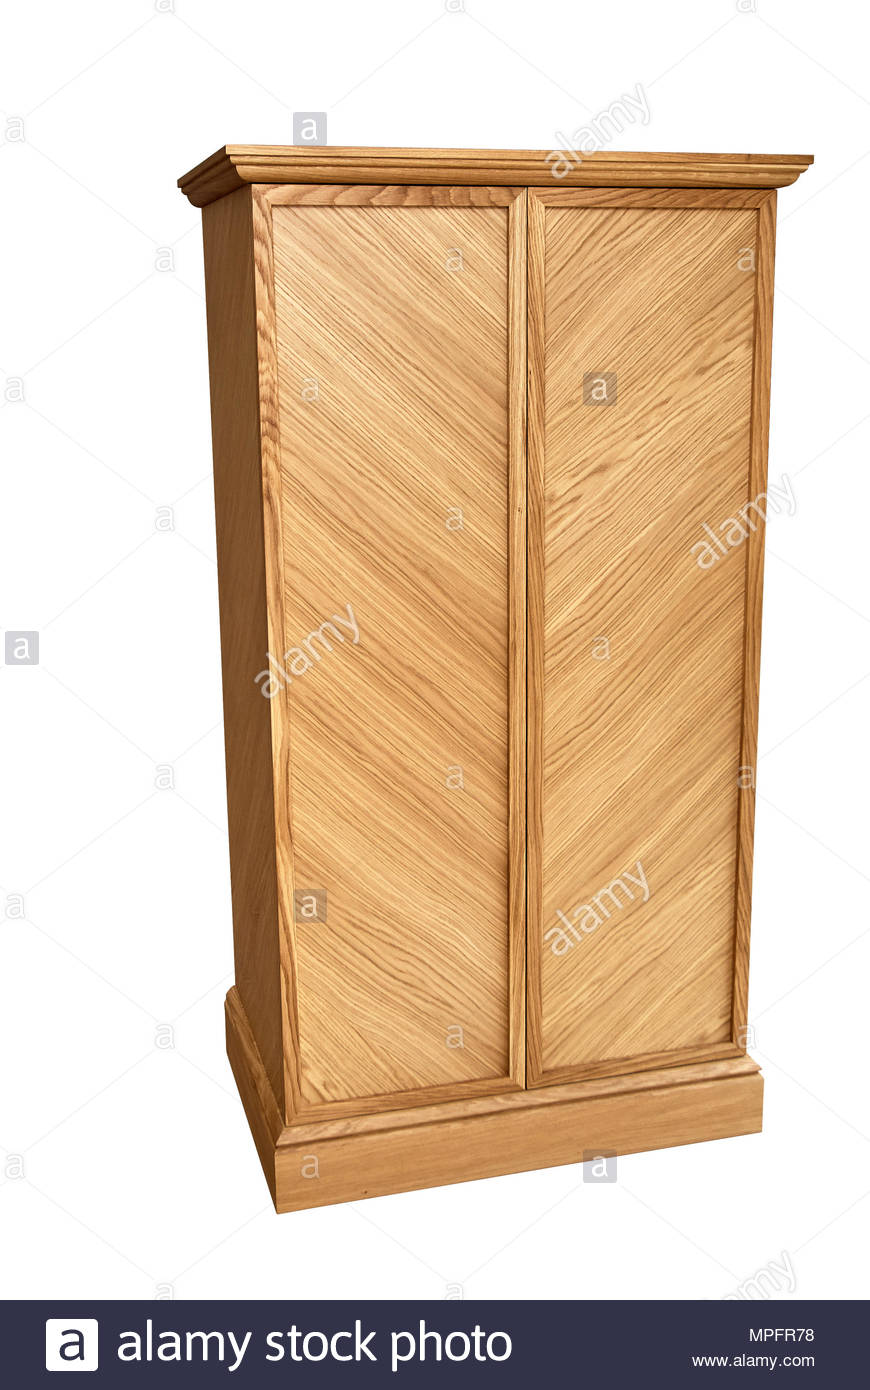 Wooden Cupboard Standing On A White Background Stock Photo